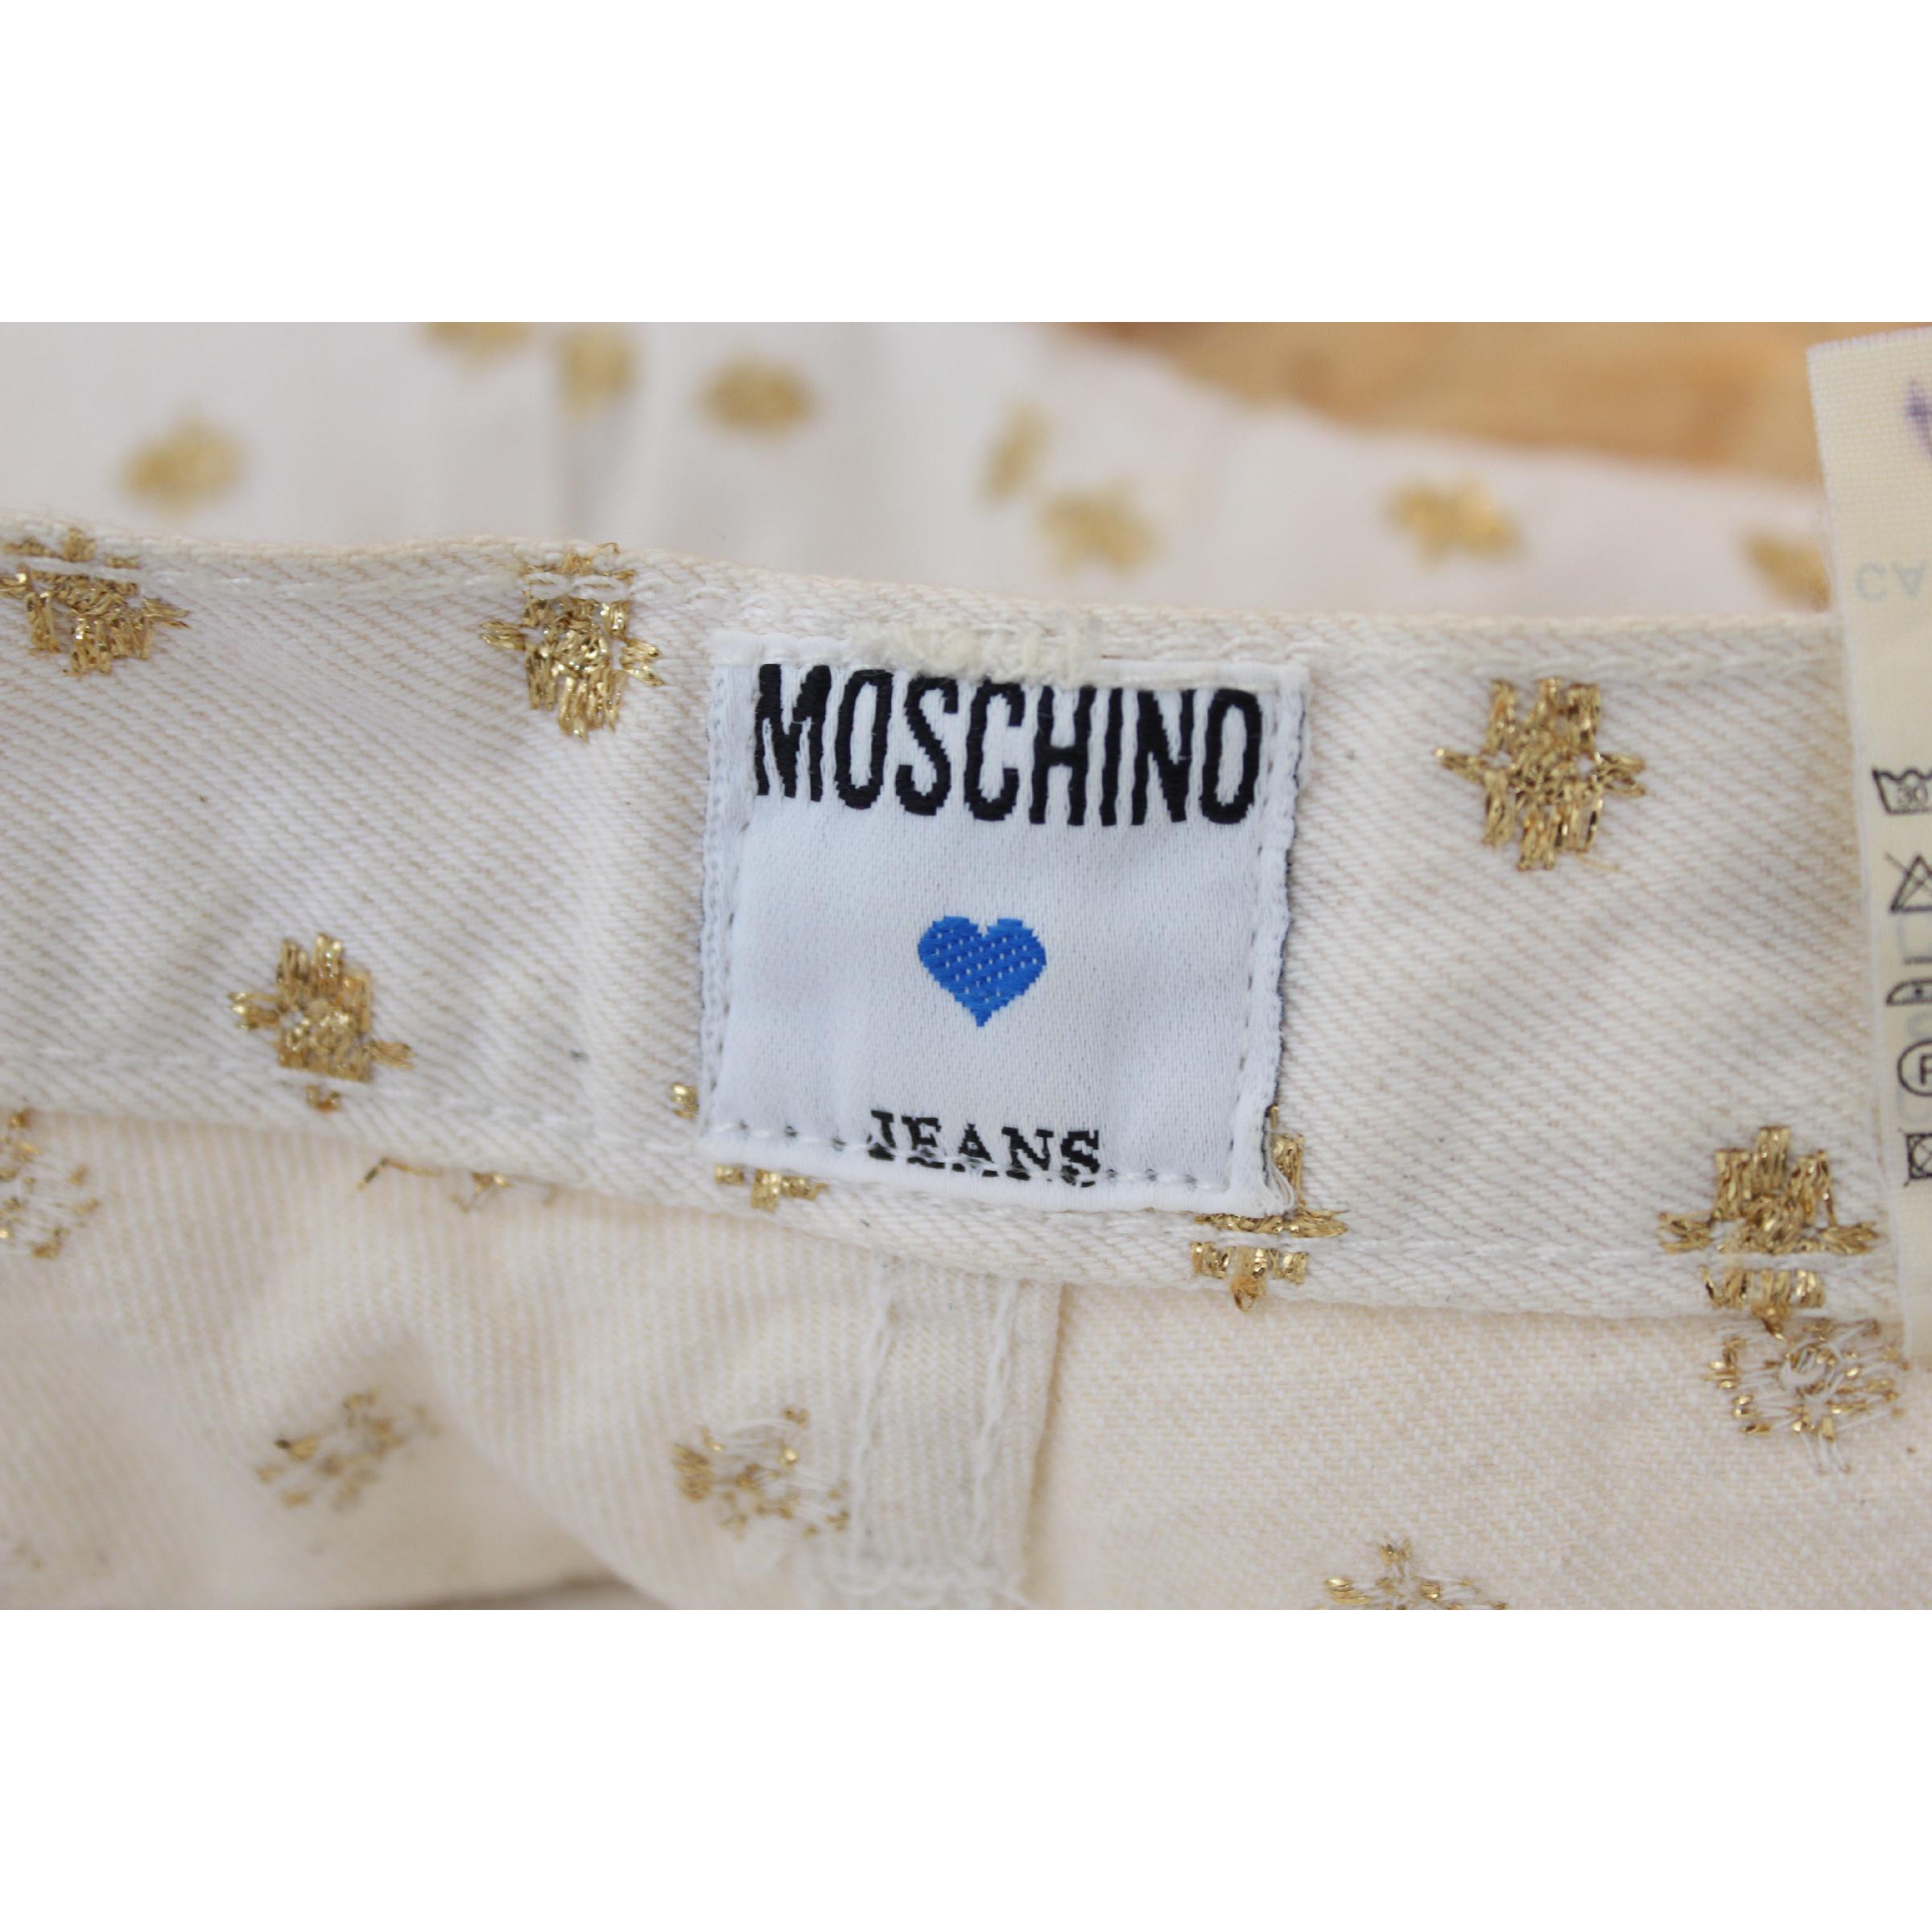 Moschino White Gold Cotton Denim Floral High Waist Pants For Sale 3